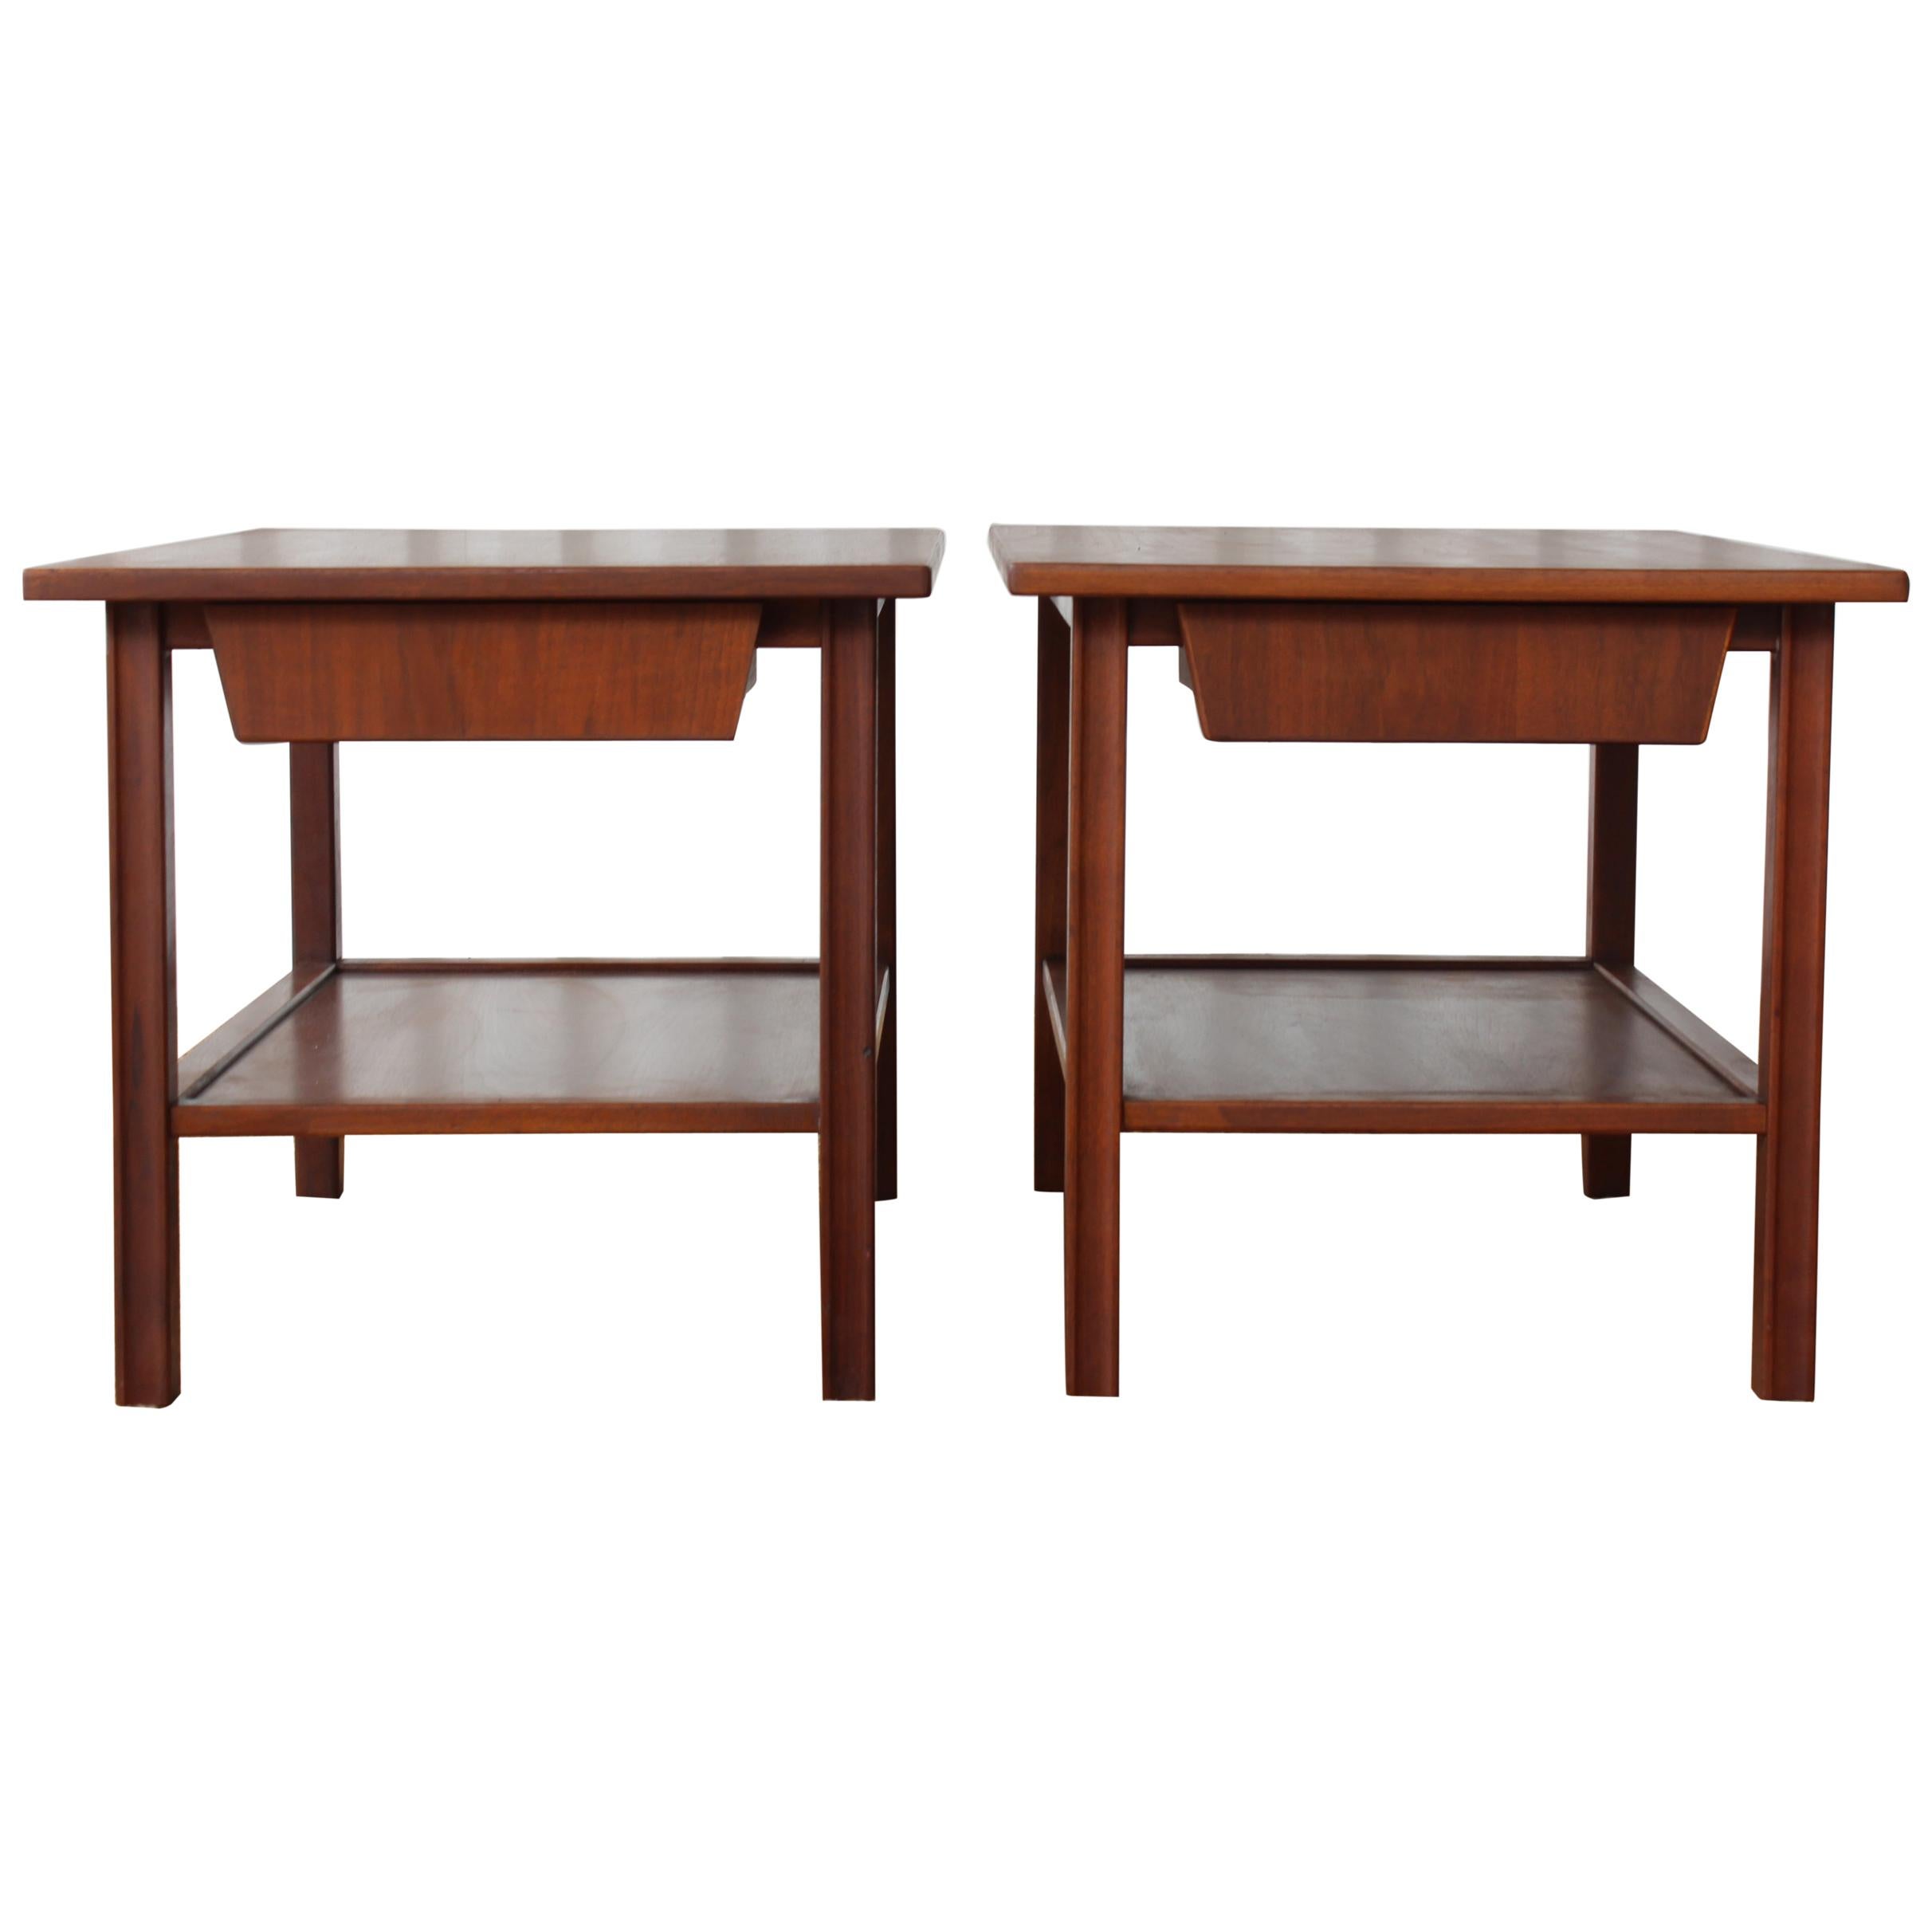 Pair of Midcentury Walnut End Tables, USA, 1960s